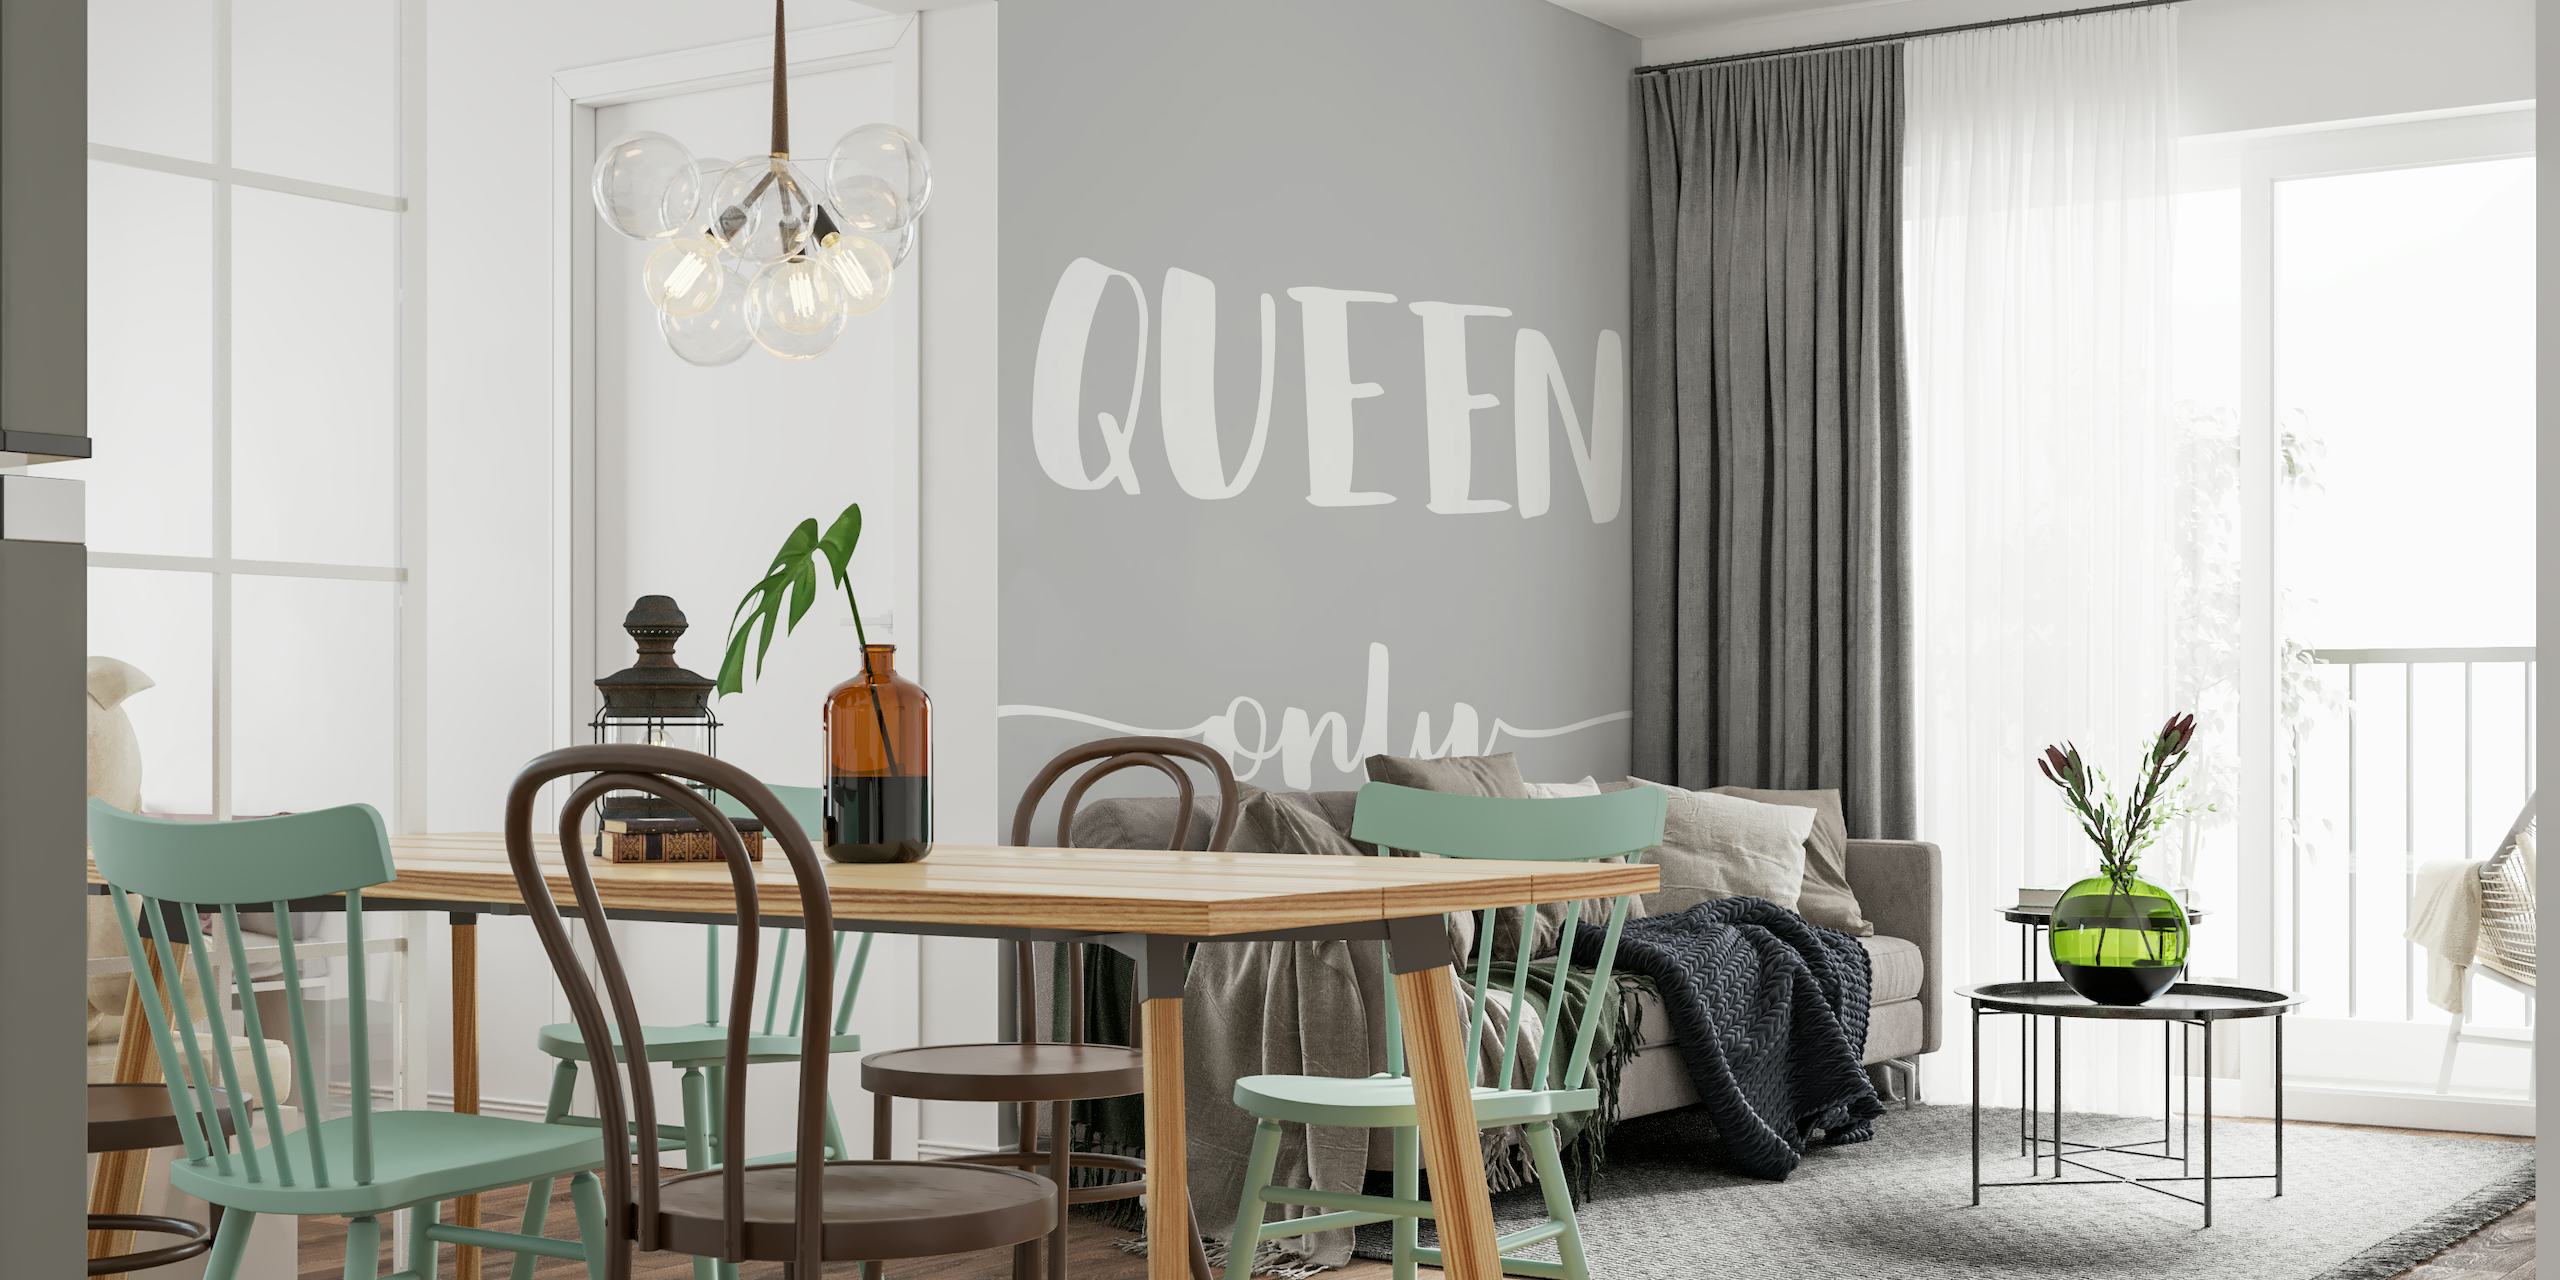 Minimalist 'Queen Only' text wall mural in grey and white